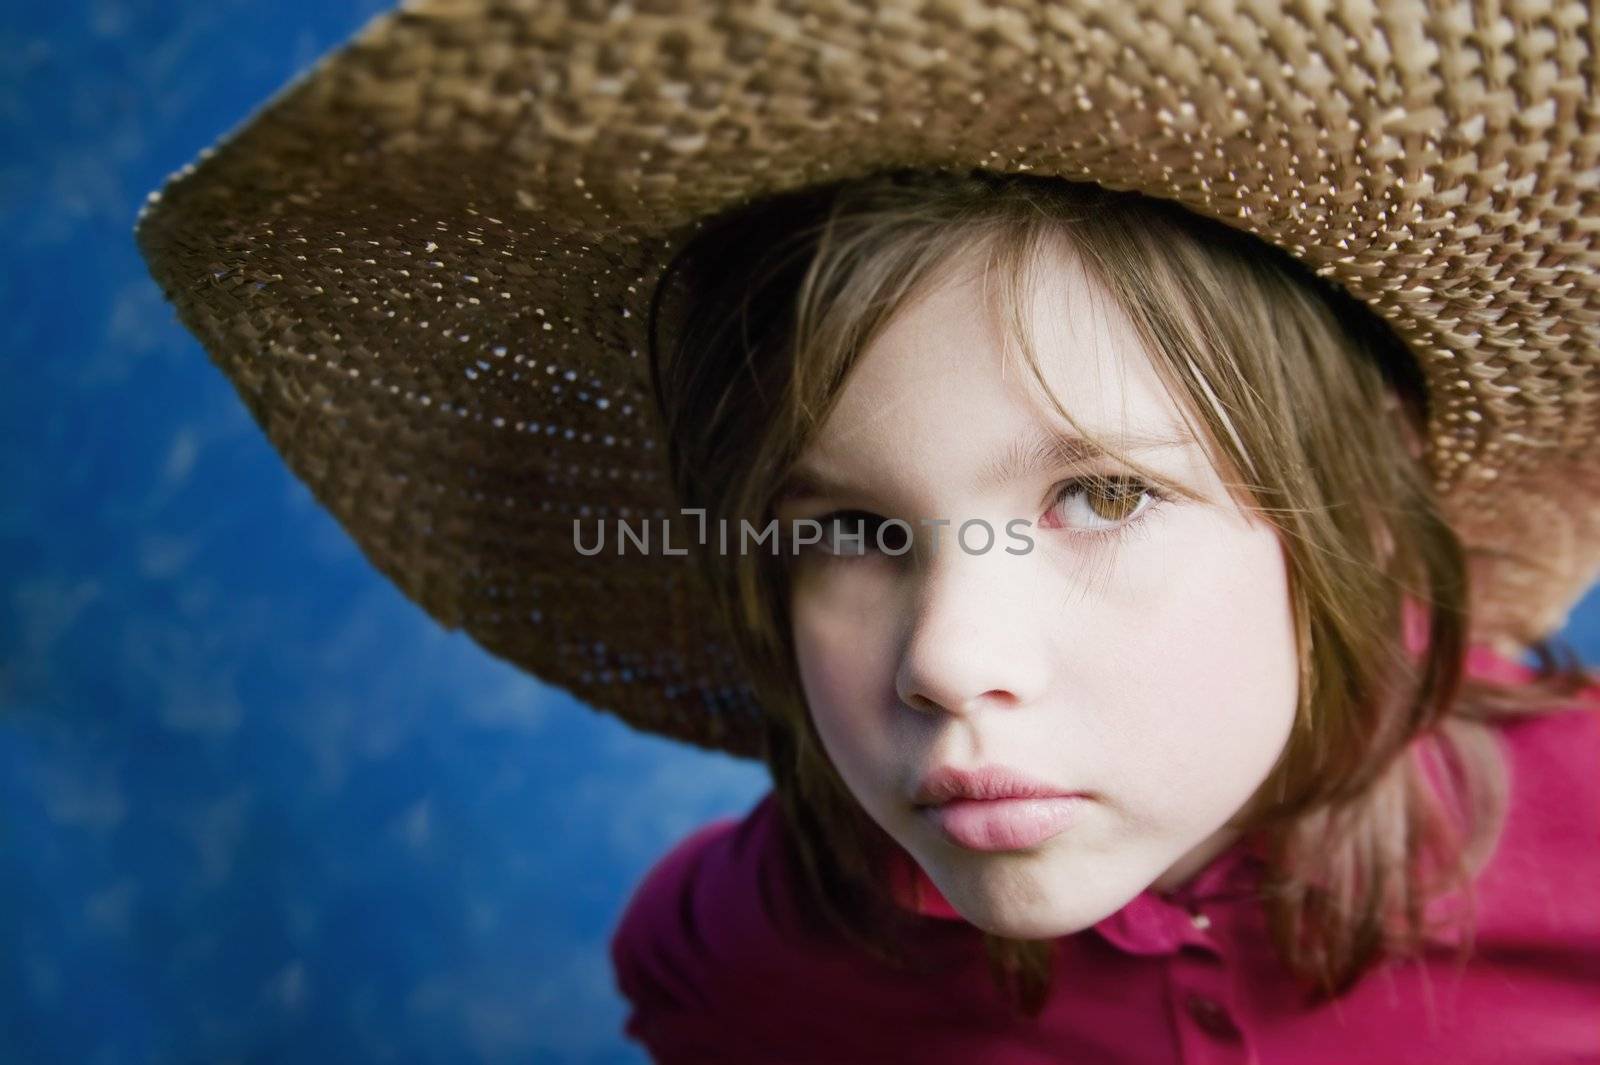 Little girl wearing a straw cowboy hat with a neutral expression